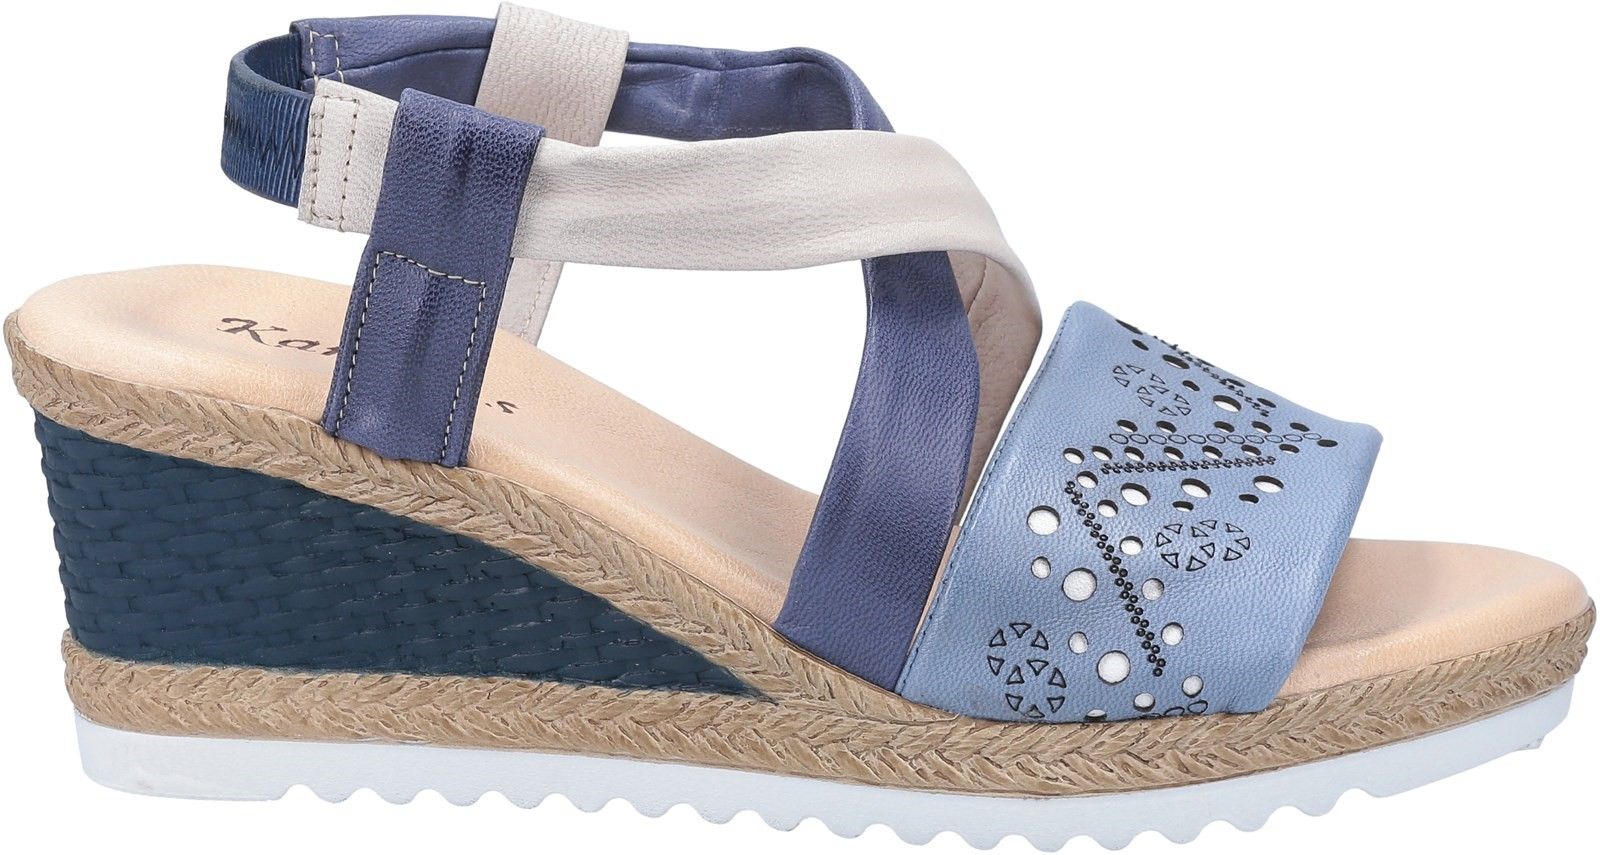 Riva Castello is a womens slip on slingback summer sandal with wedge heel, platform sole, soft, multicoloured leather uppers and cushioned insoles.